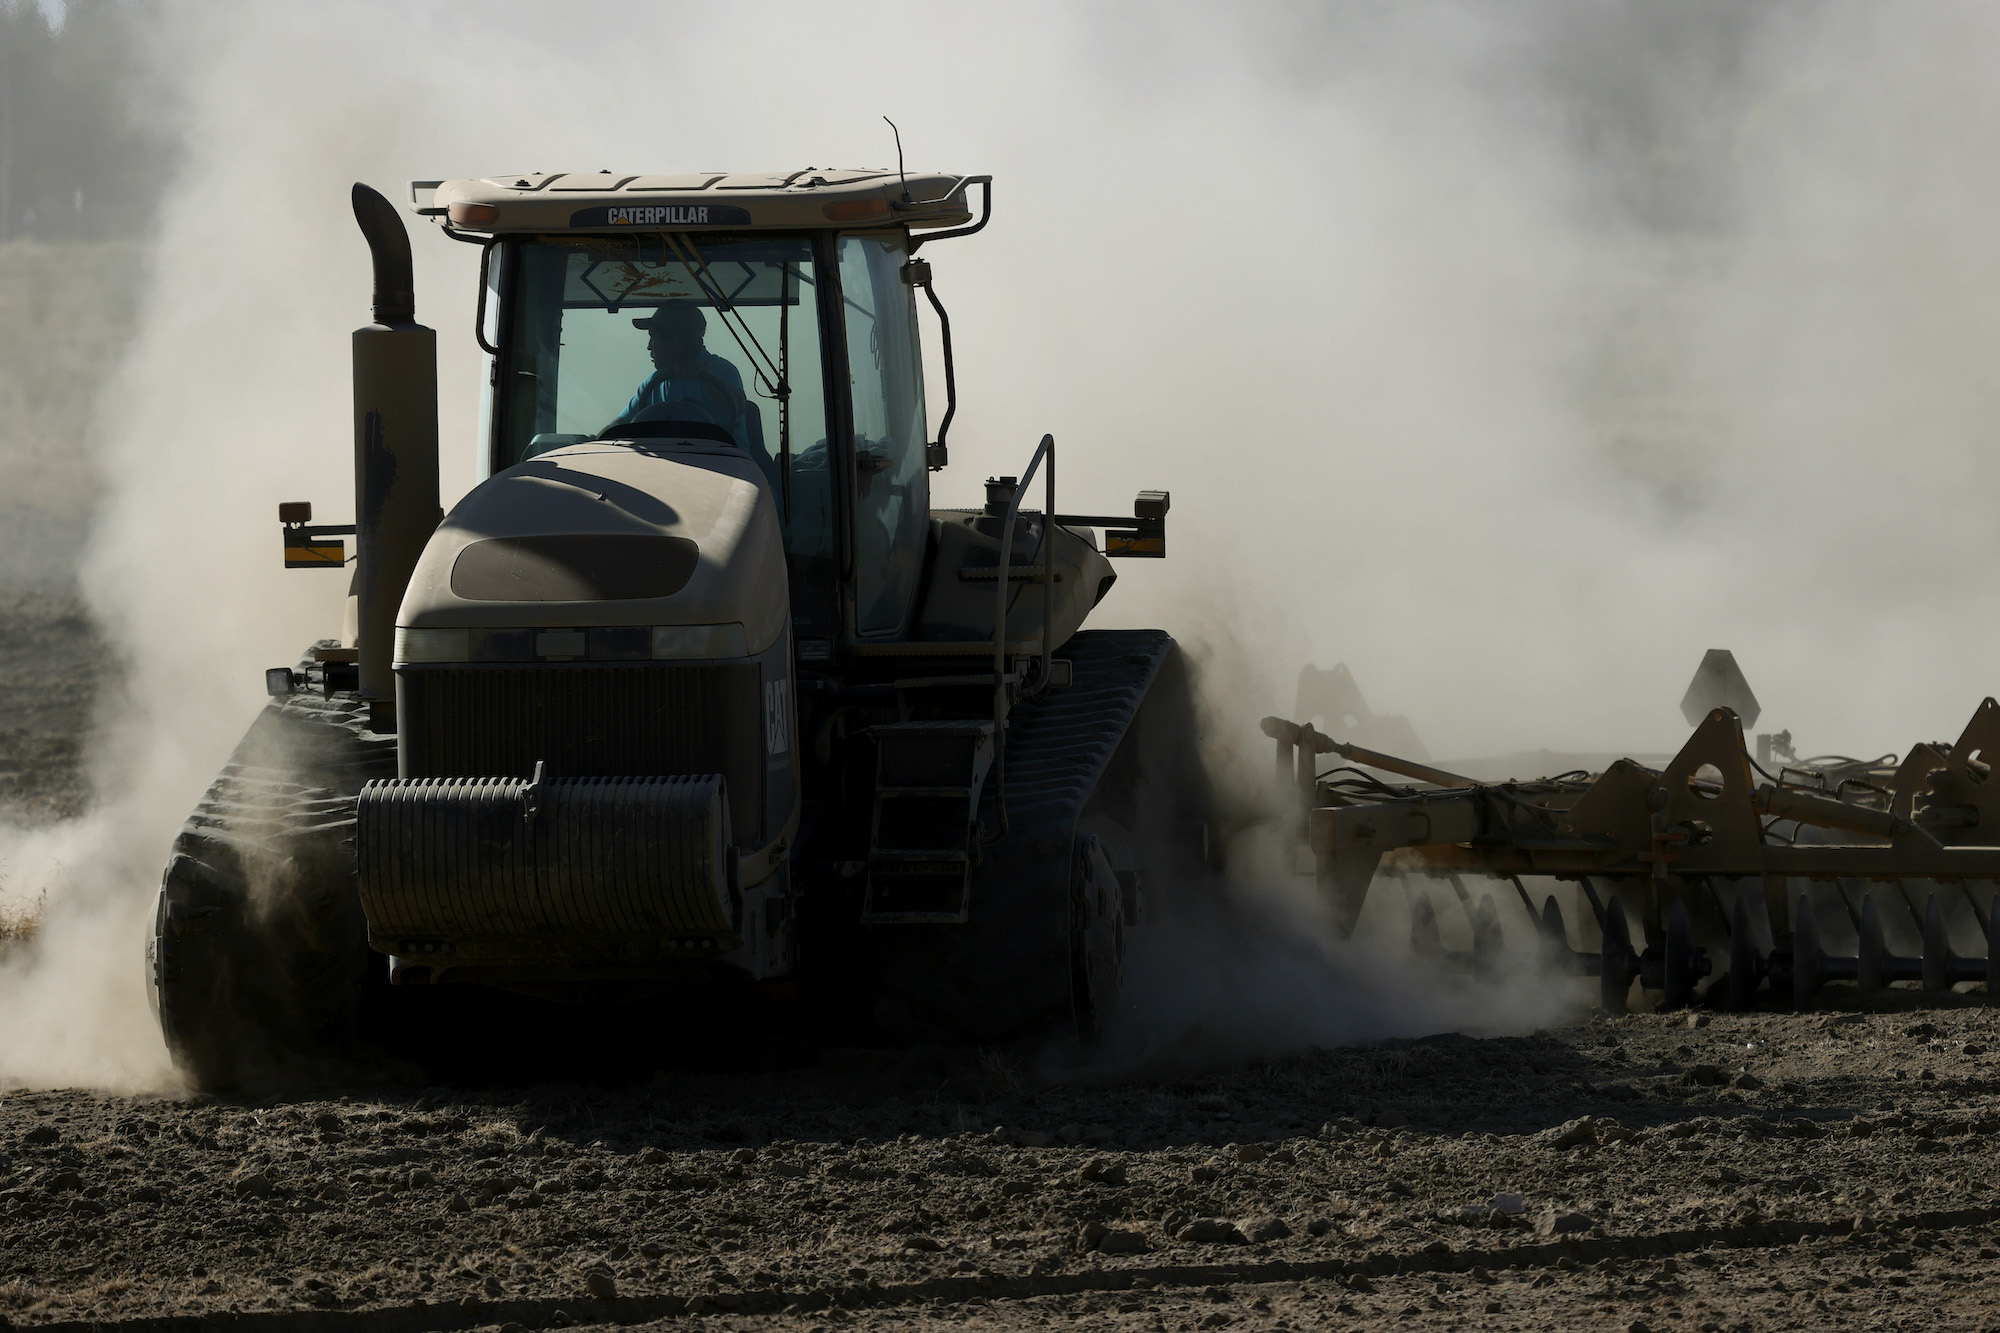 A tractor kicks up dust as it plows a dry field on May 26, 2021, in Chowchilla, California